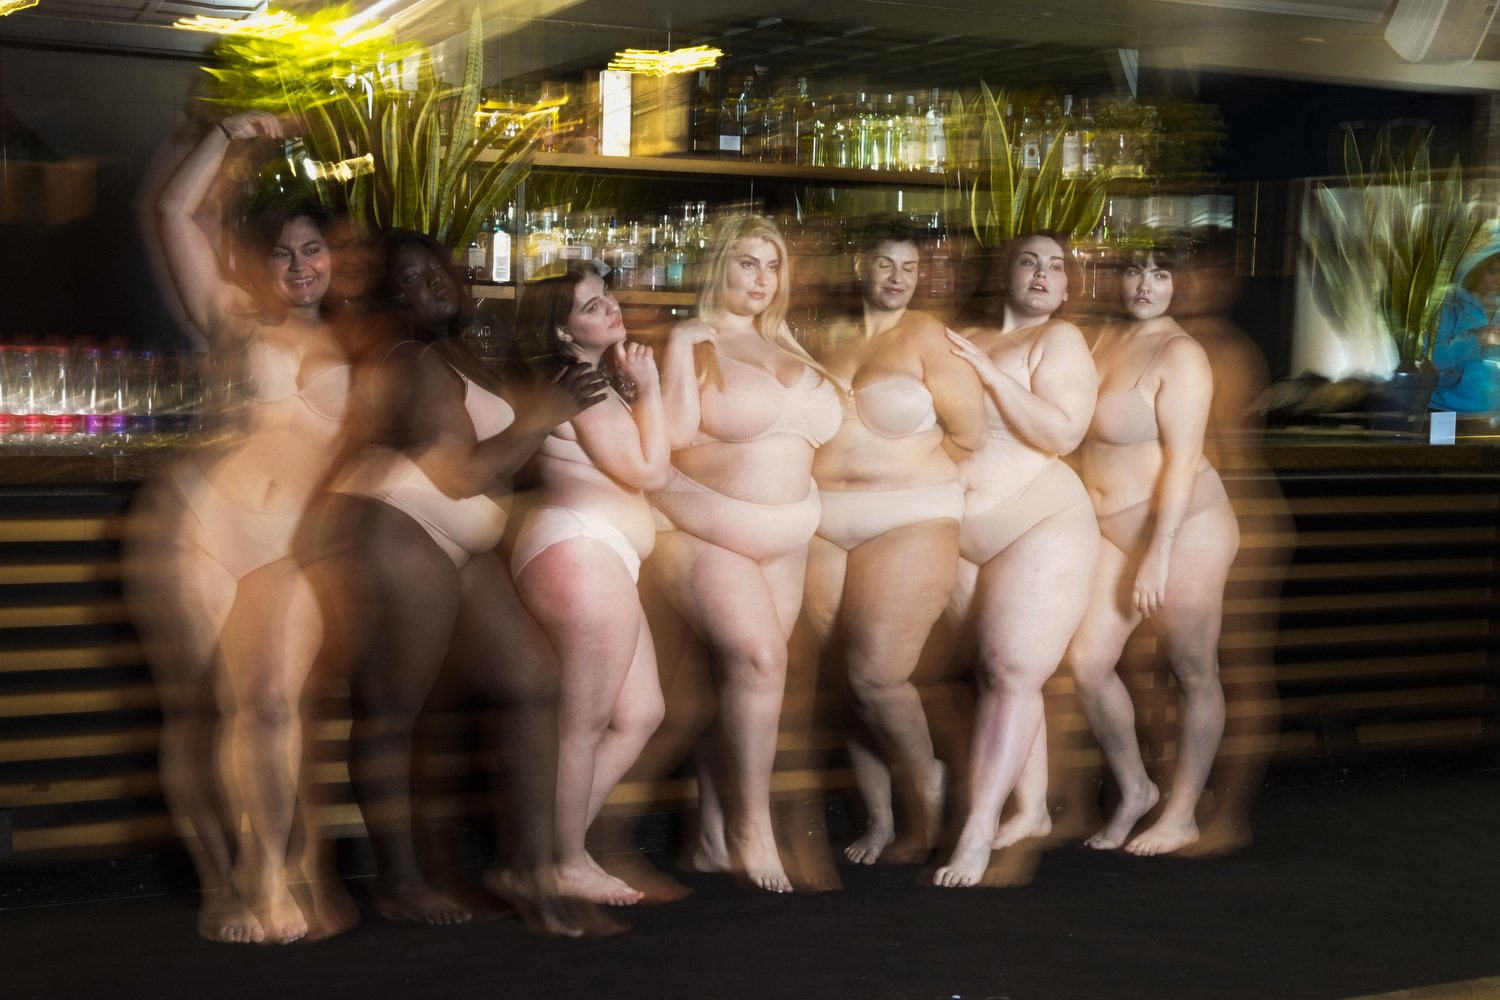  Models pose during a photo shoot for "L'Imperfetta (The Imperfect) model agency" in Rome, Tuesday, Feb. 7, 2023.  